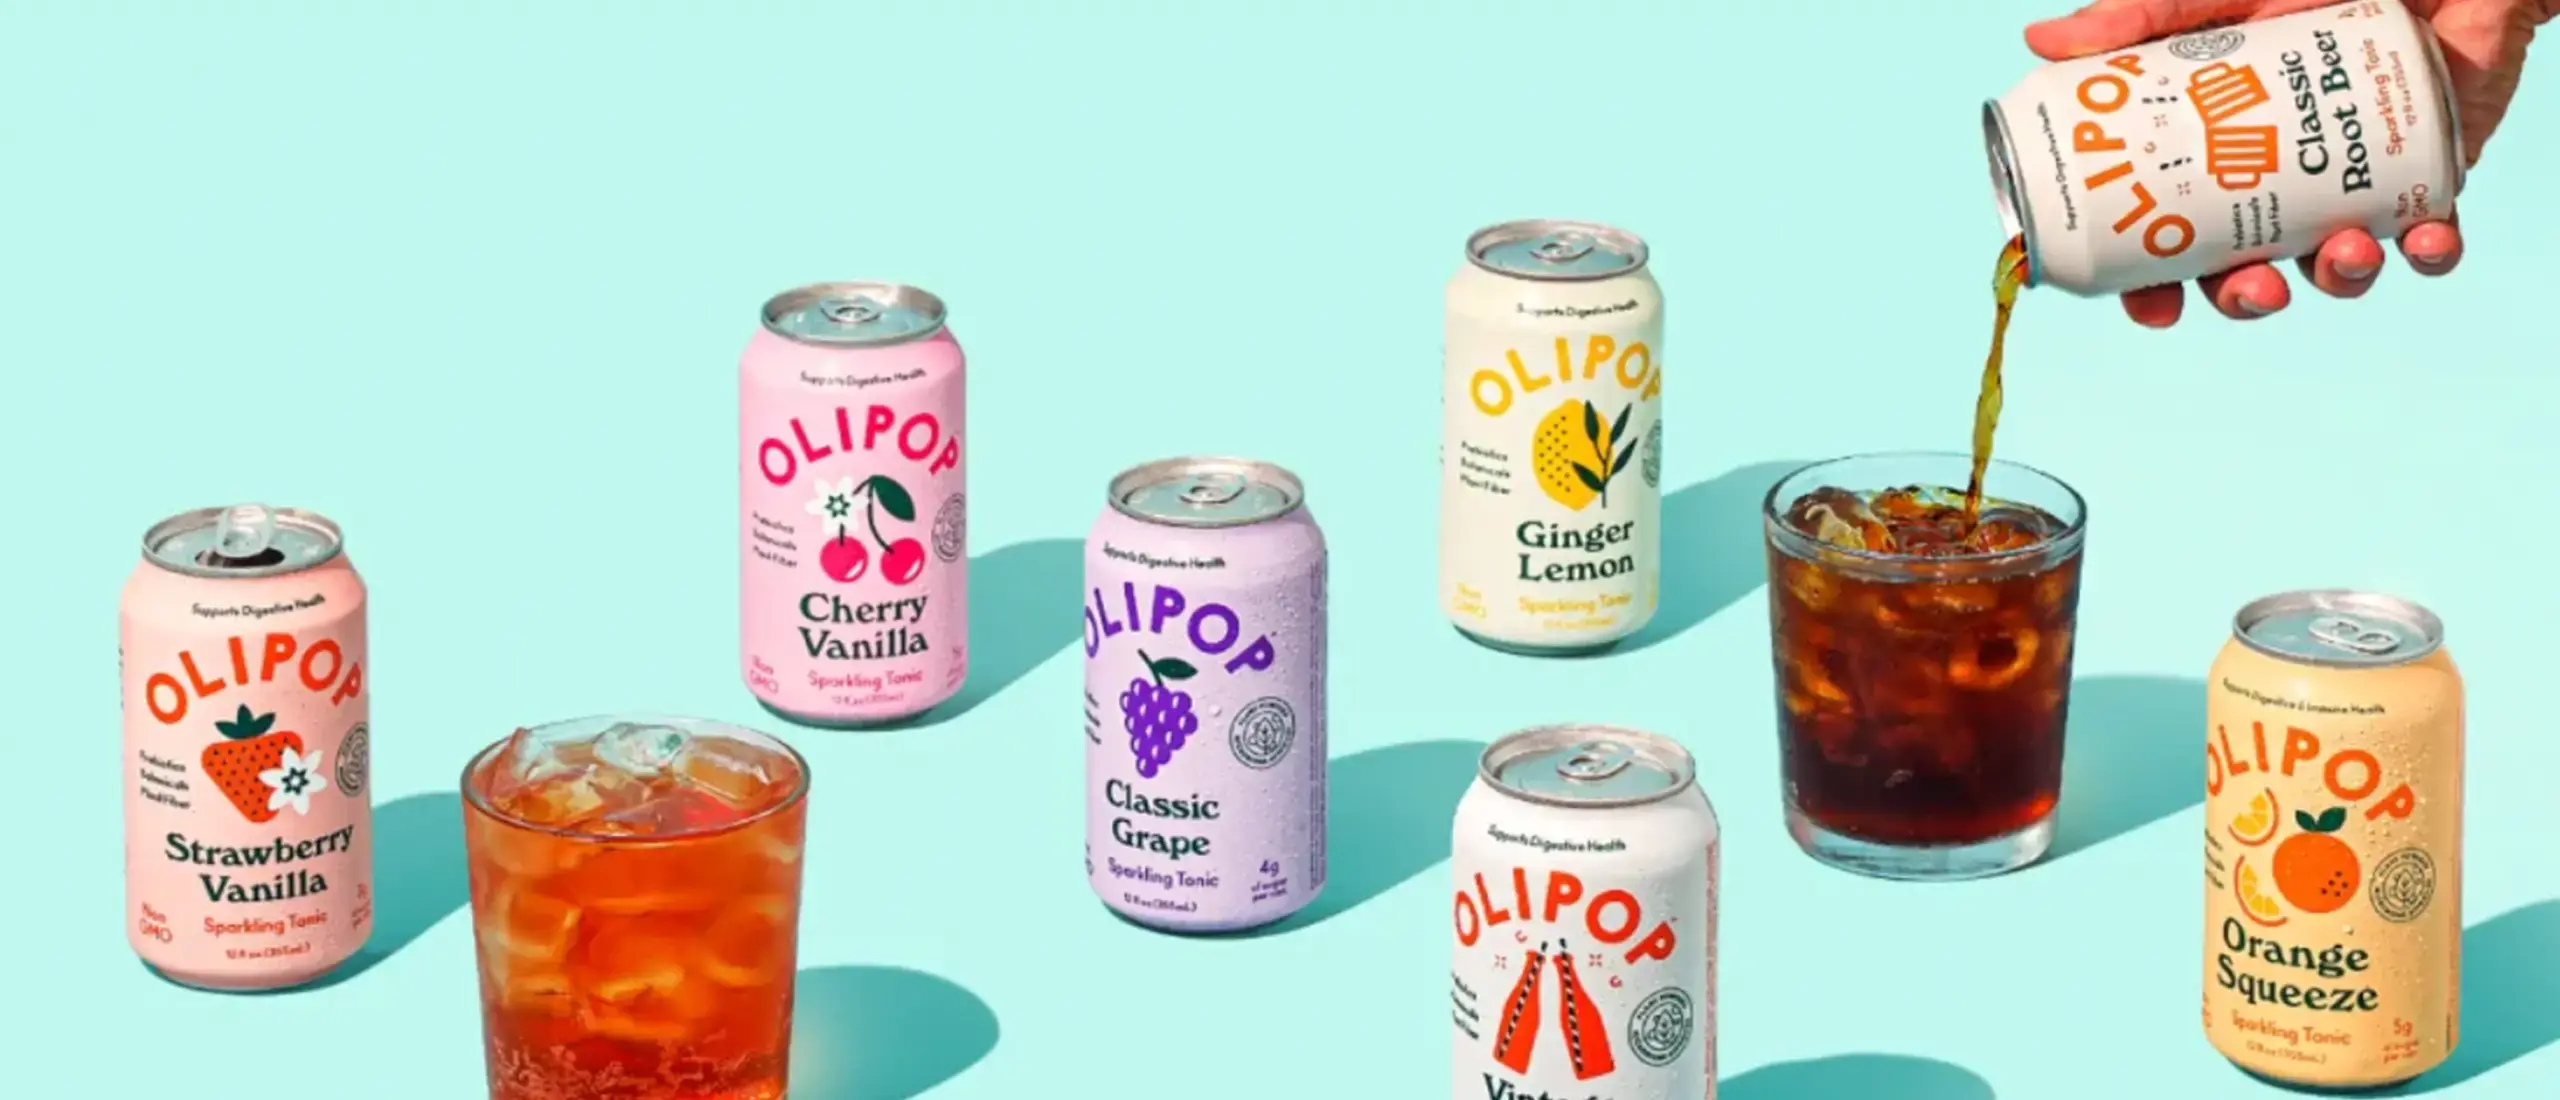 7 different olipop soda cans on a light blue background. Two glasses full of soda sit between the cans